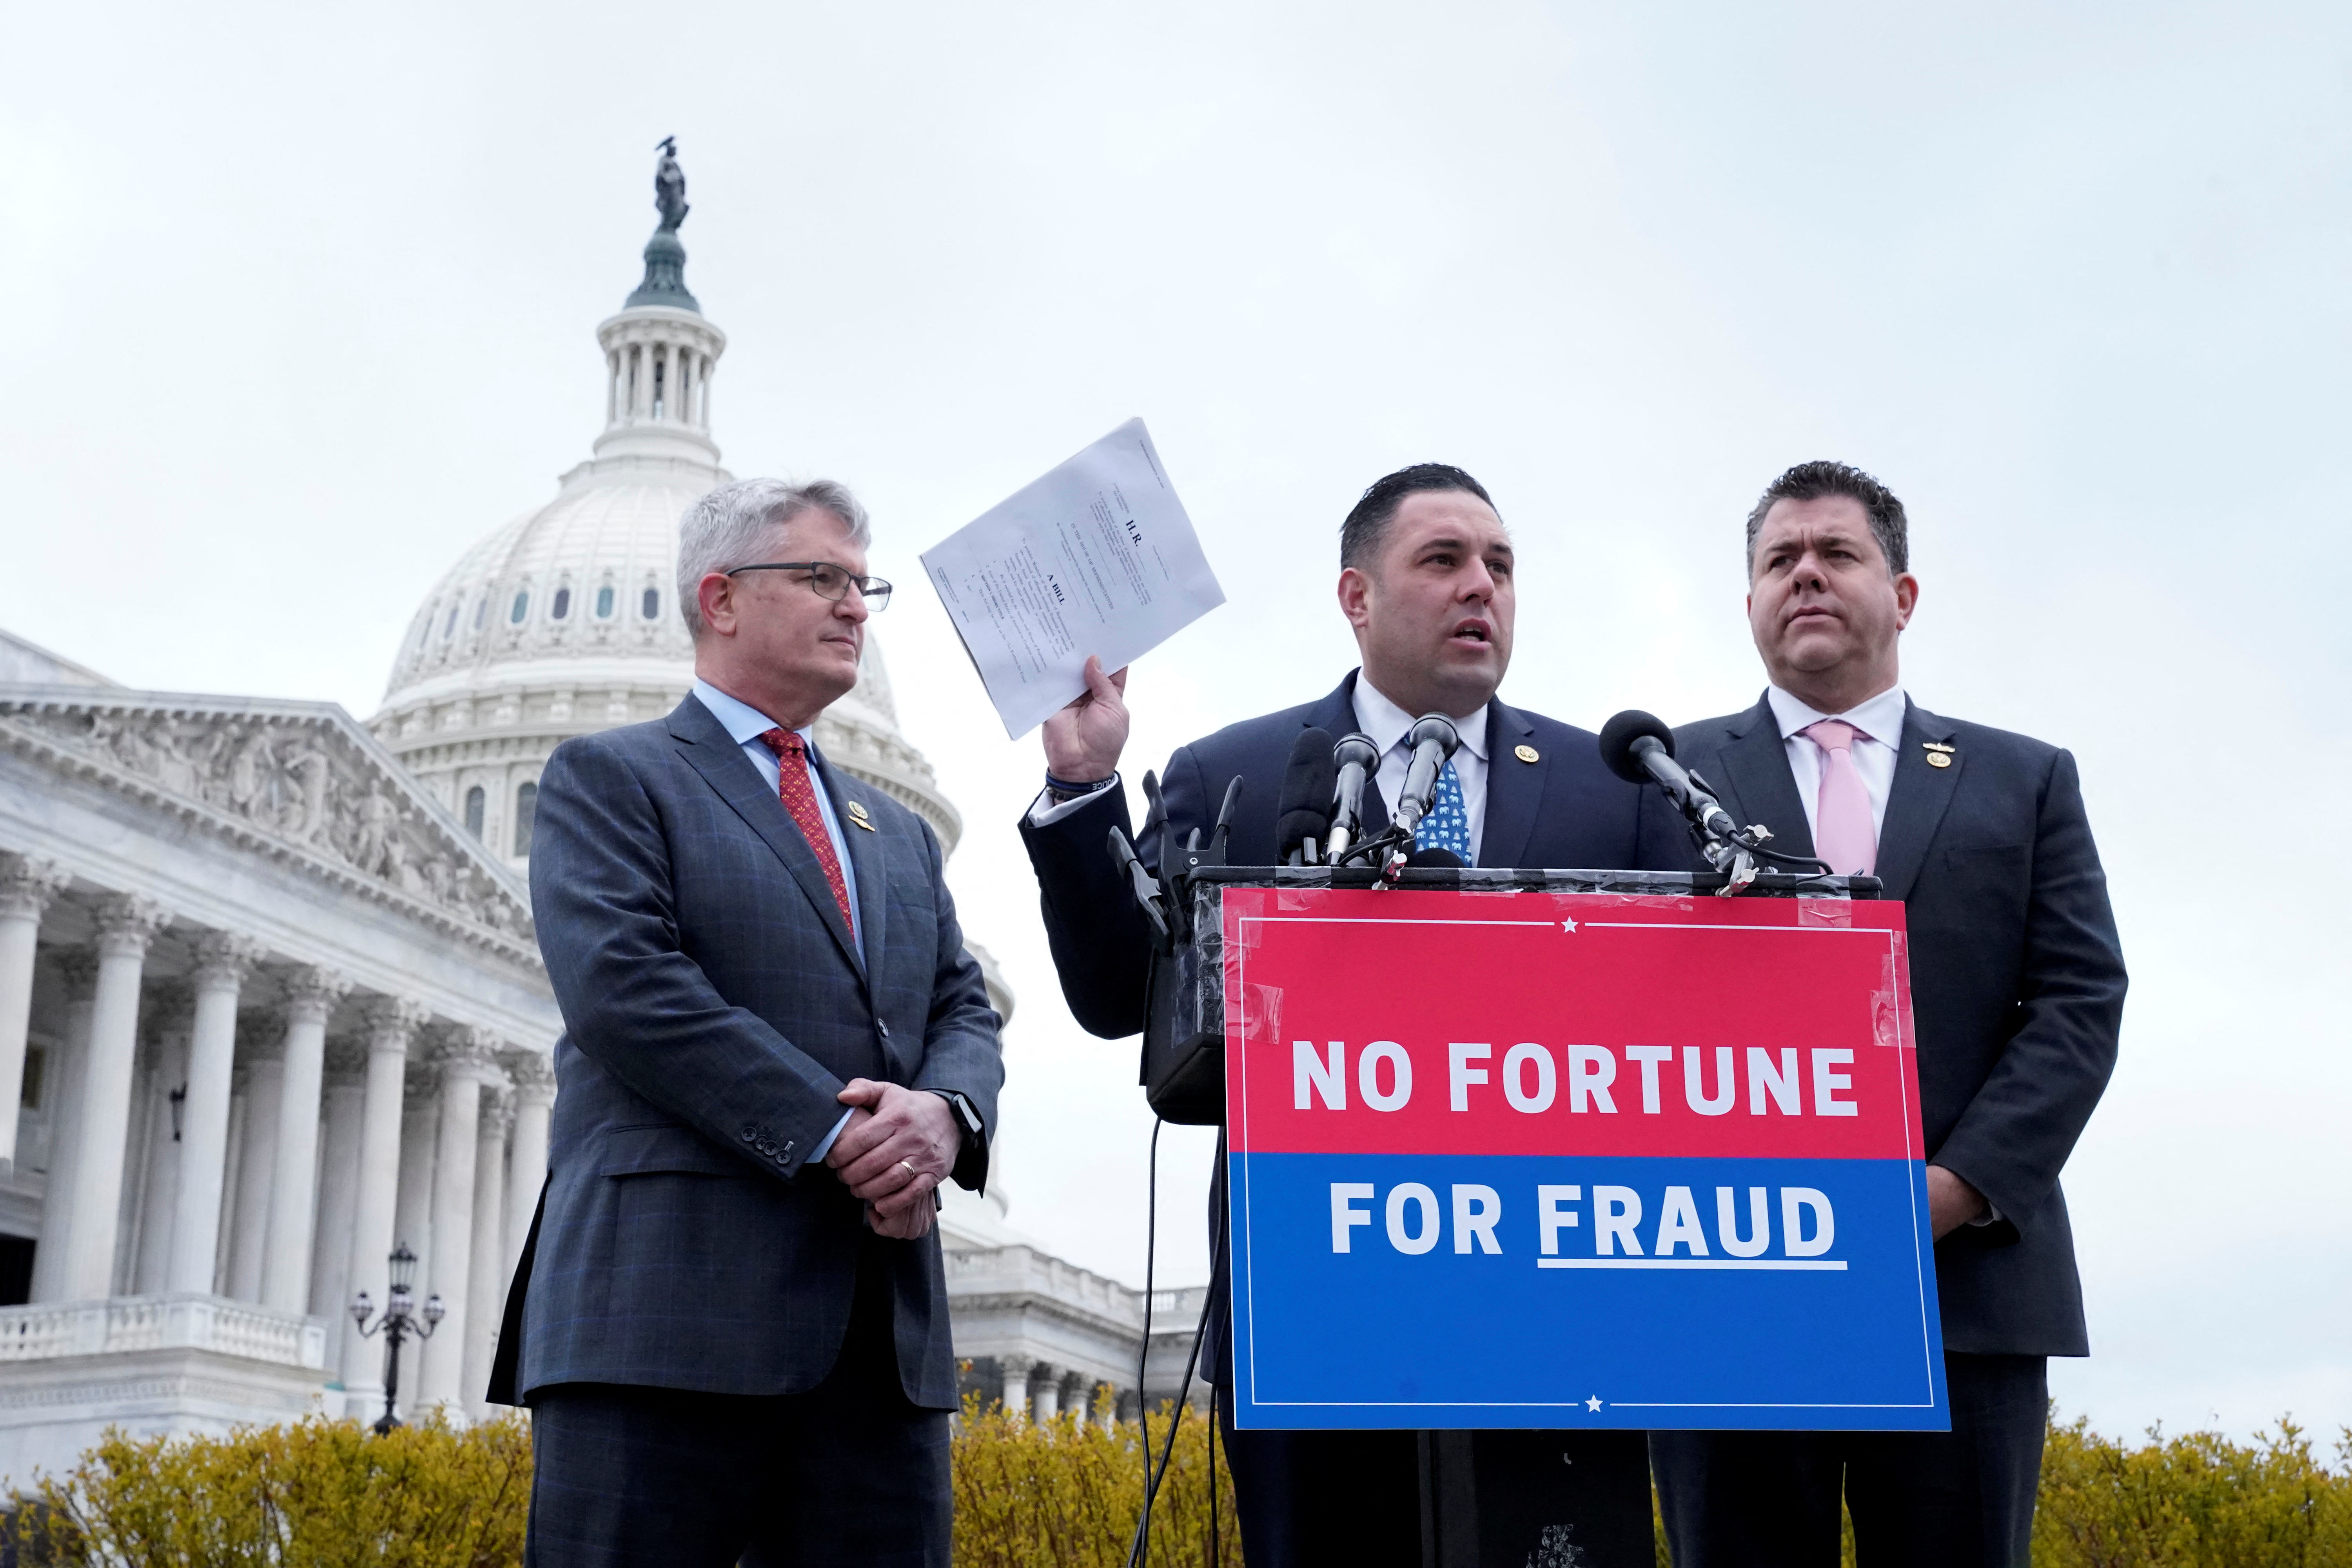 Rep. Brandon Williams (R-NY) and Rep. Nicholas LaLota (R-NY) look on as Rep. Anthony D’Esposito (R-NY) holds a copy of the "No Fortune for Fraud" Act, a law prohibiting House lawmakers convicted of certain offenses from profiting off their fabrications, during a press conference on Capitol Hill in Washington, U.S., March 7, 2023. REUTERS/Bonnie Cash